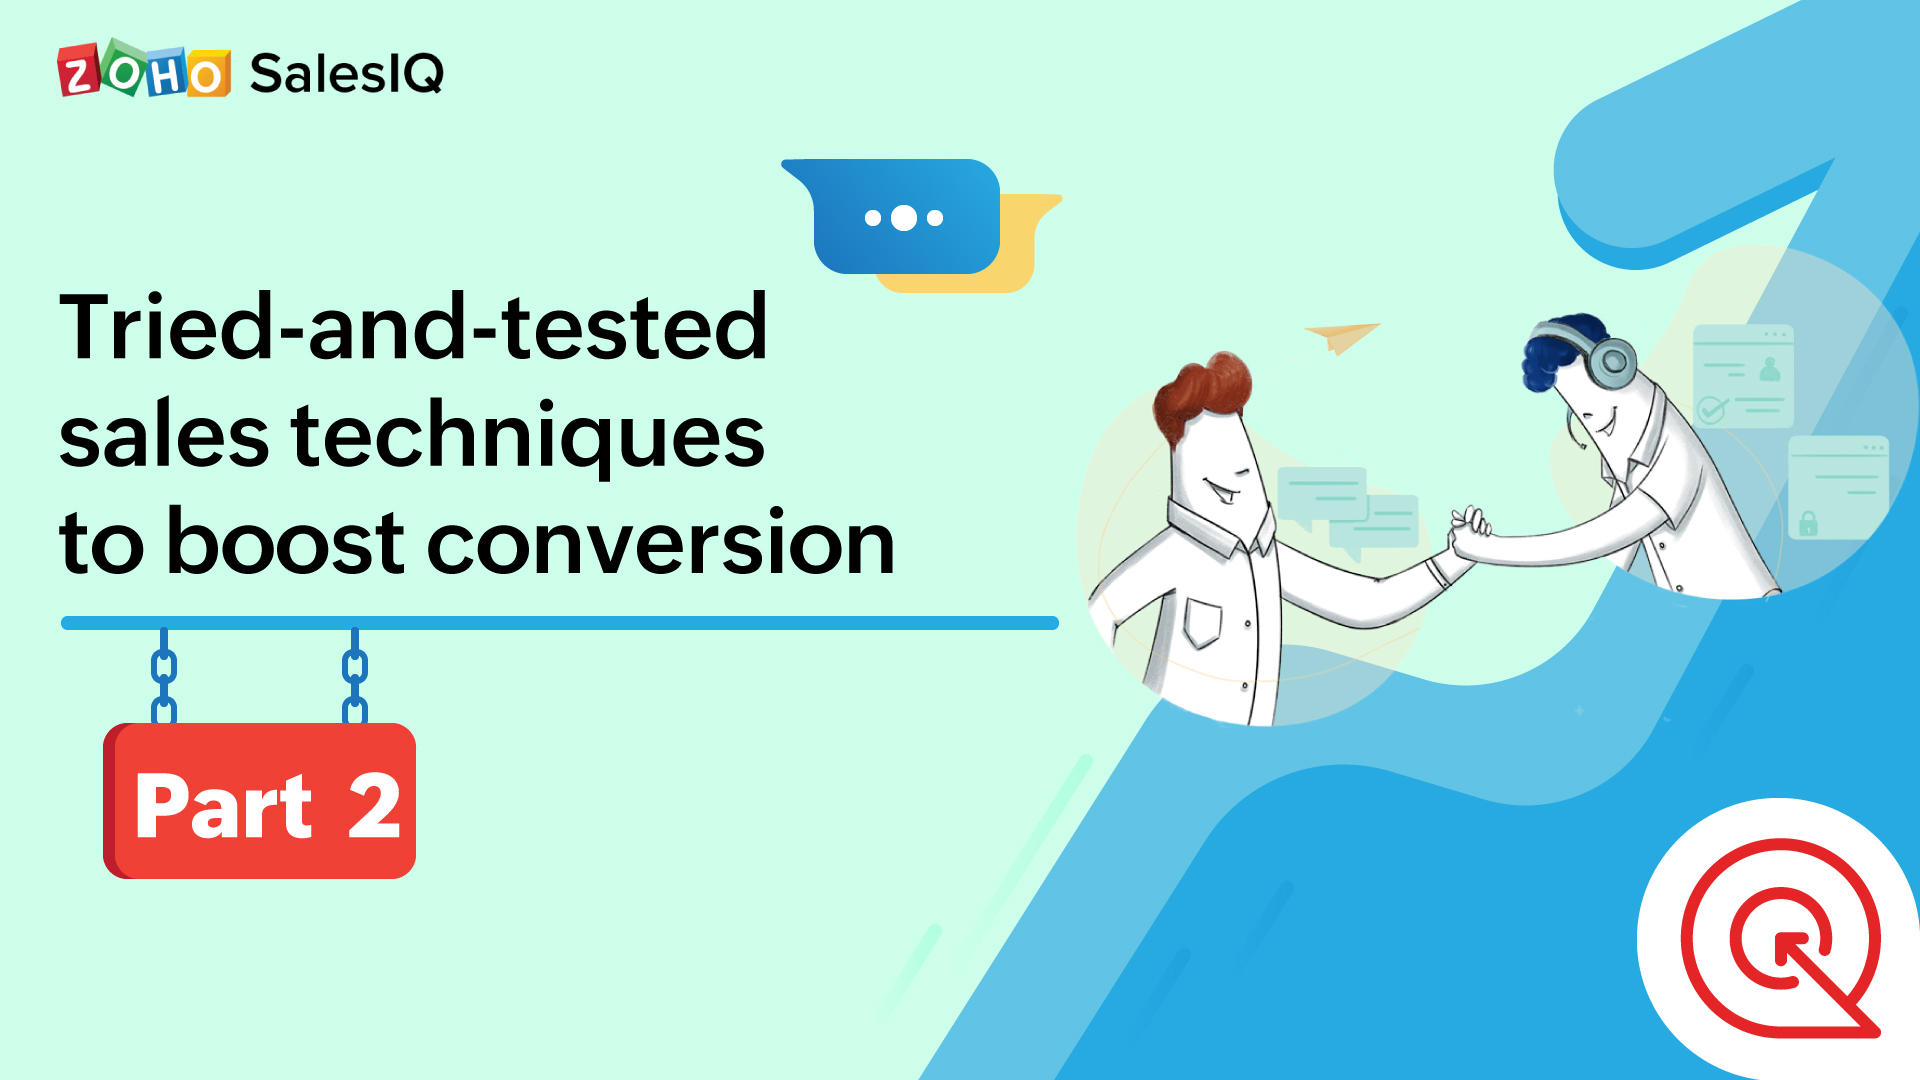 Tried and tested sales techniques to move leads down the sales funnel quicker: Part 2